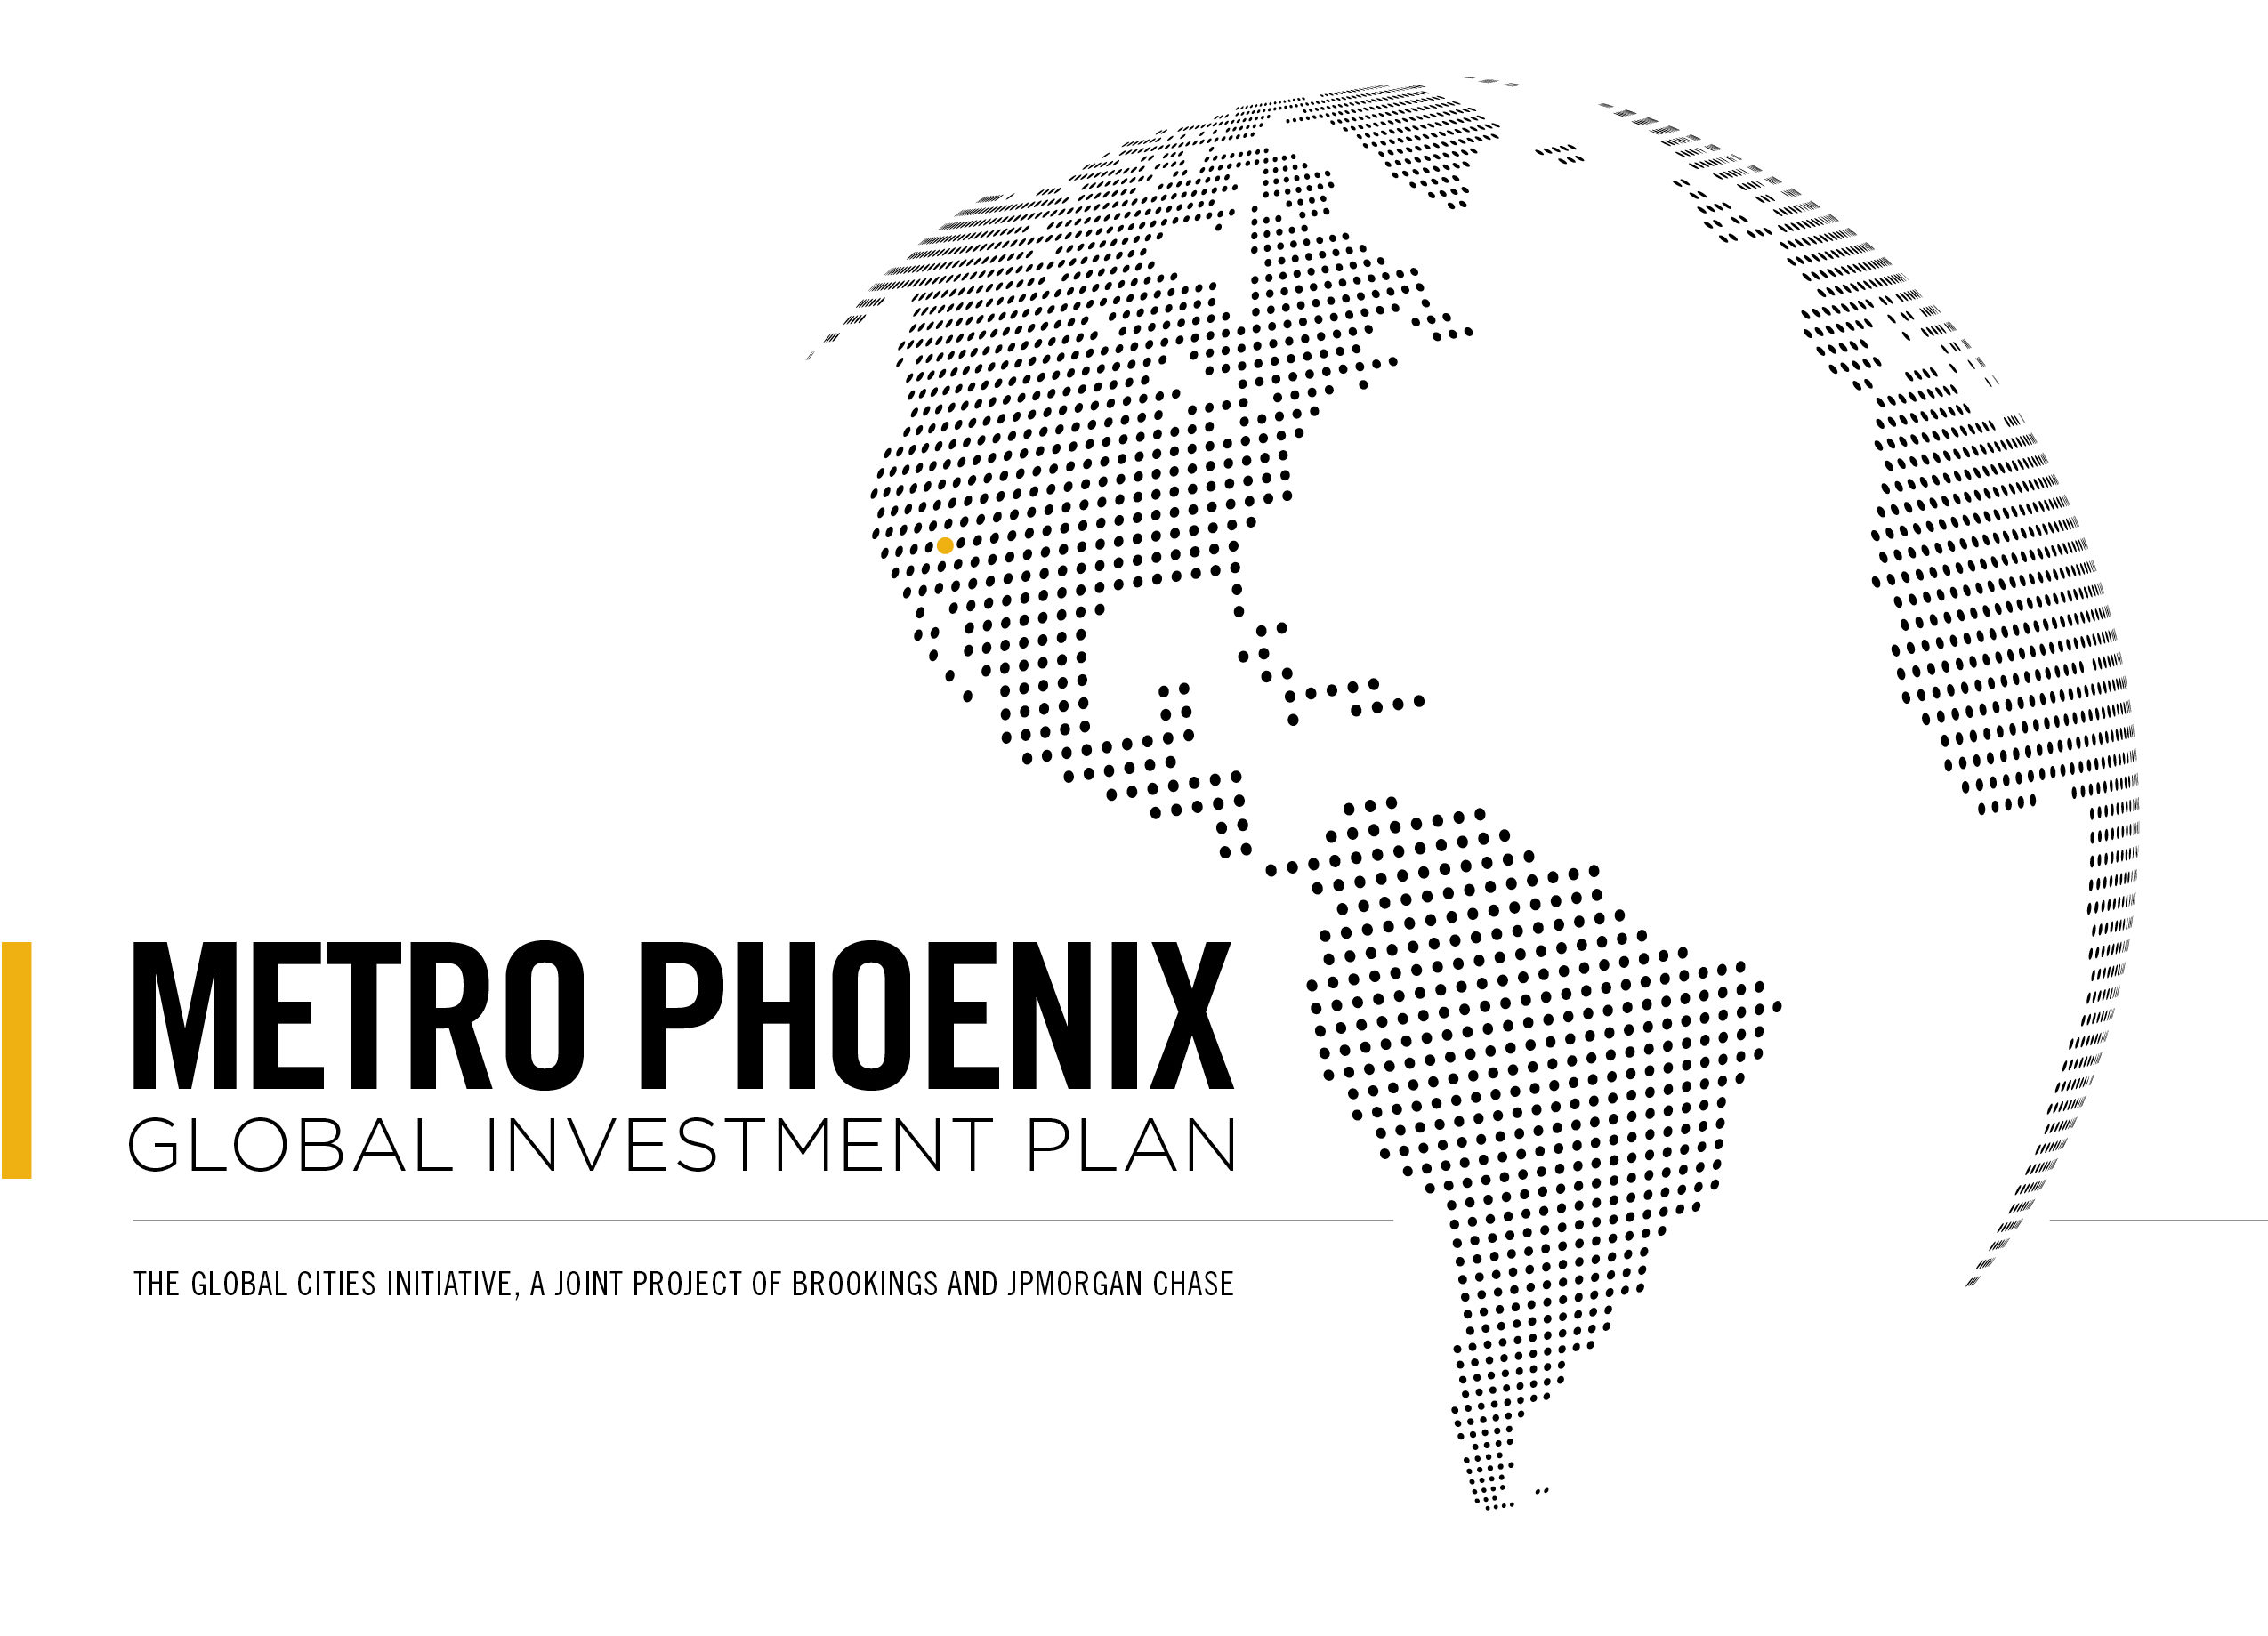 The Greater Phoenix Economic Council, in partnership with the MEMS and Sensors Industry Group, will host an event to unveil the Metro Phoenix Global Investment Plan on February 15